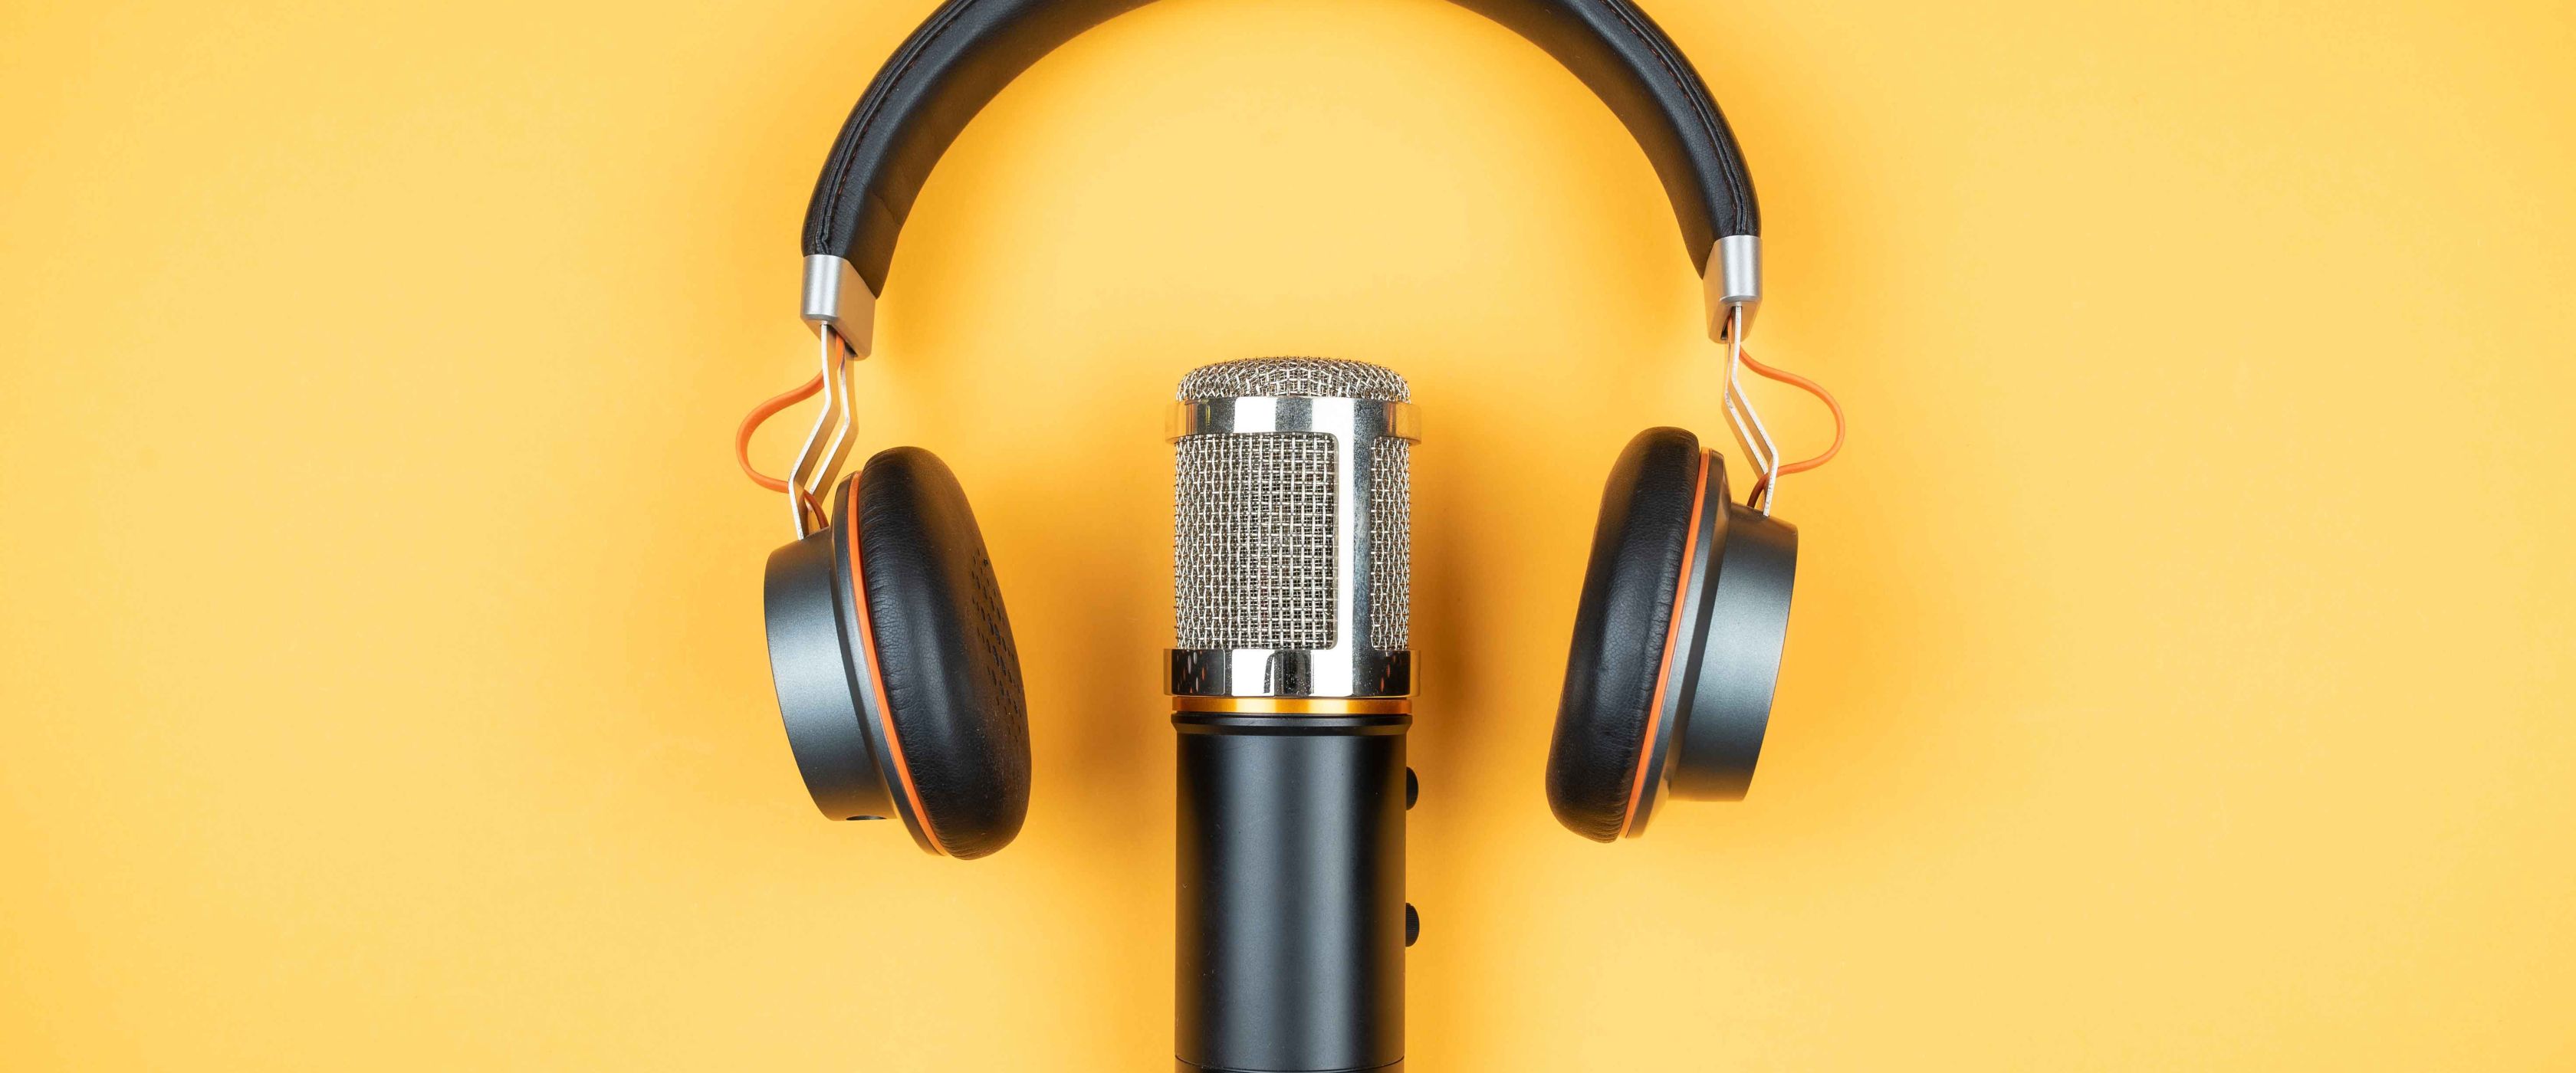 Podcast microphone and headphones on yellow background